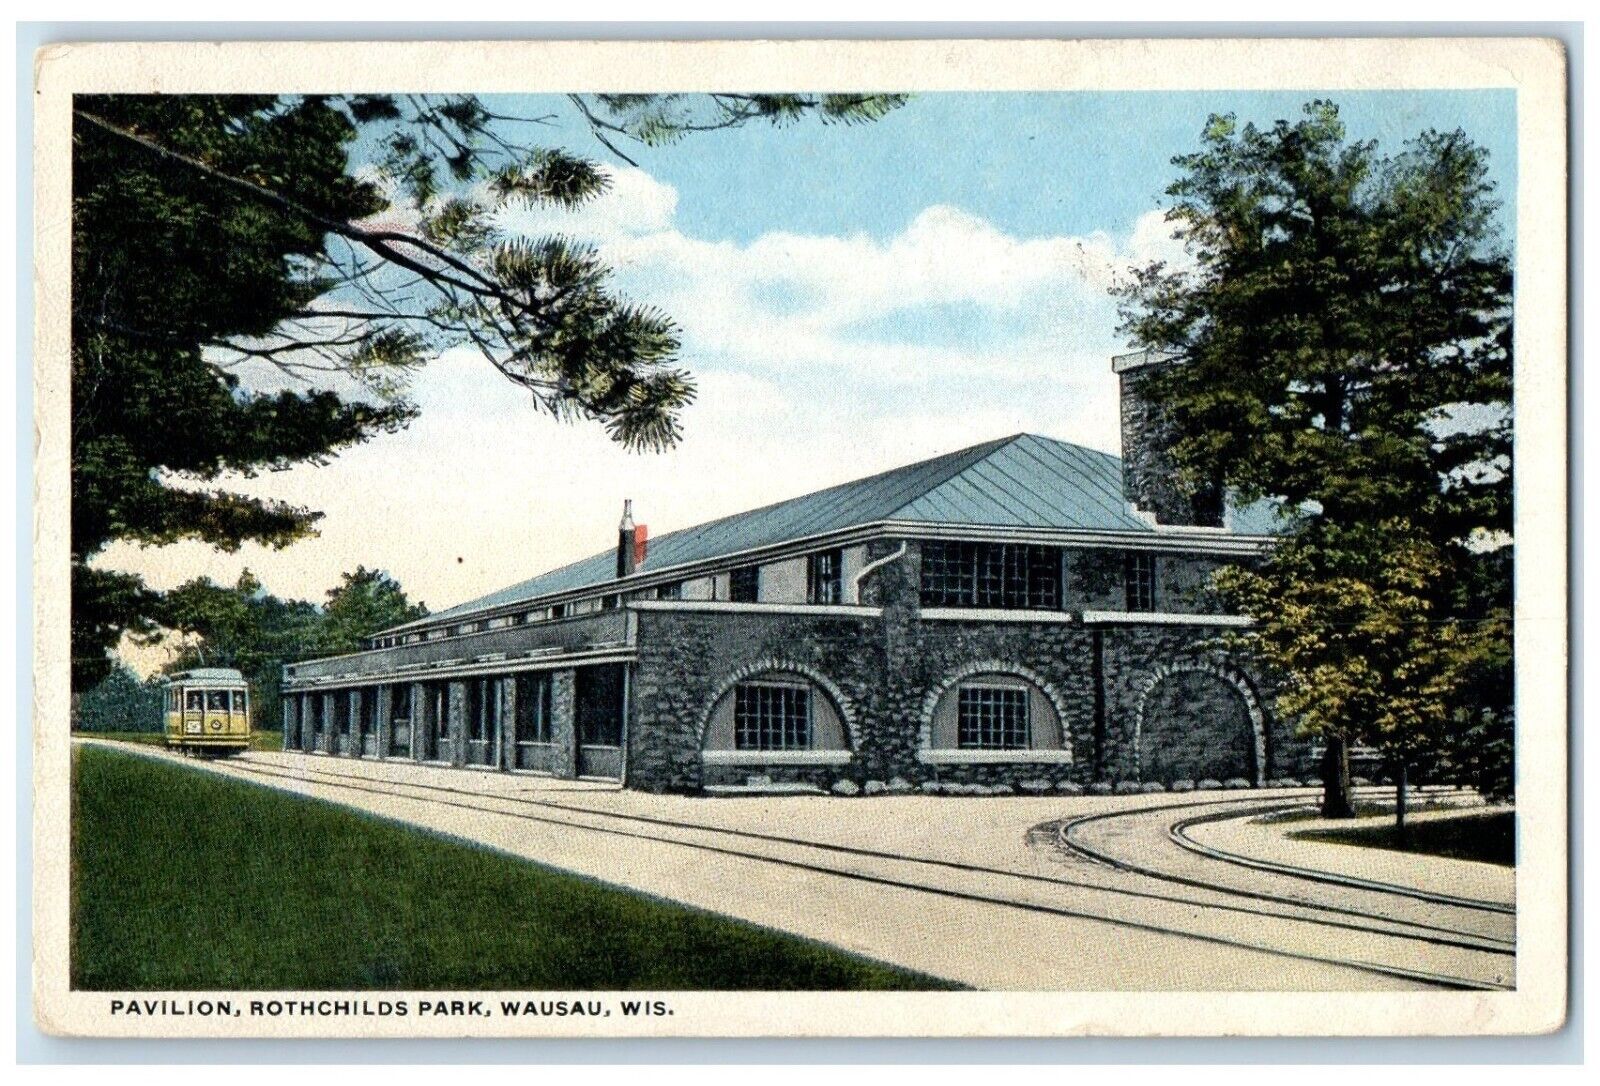 1915 Exterior Pavilion Rothchilds Park Building Wausau Wisconsin Posted Postcard